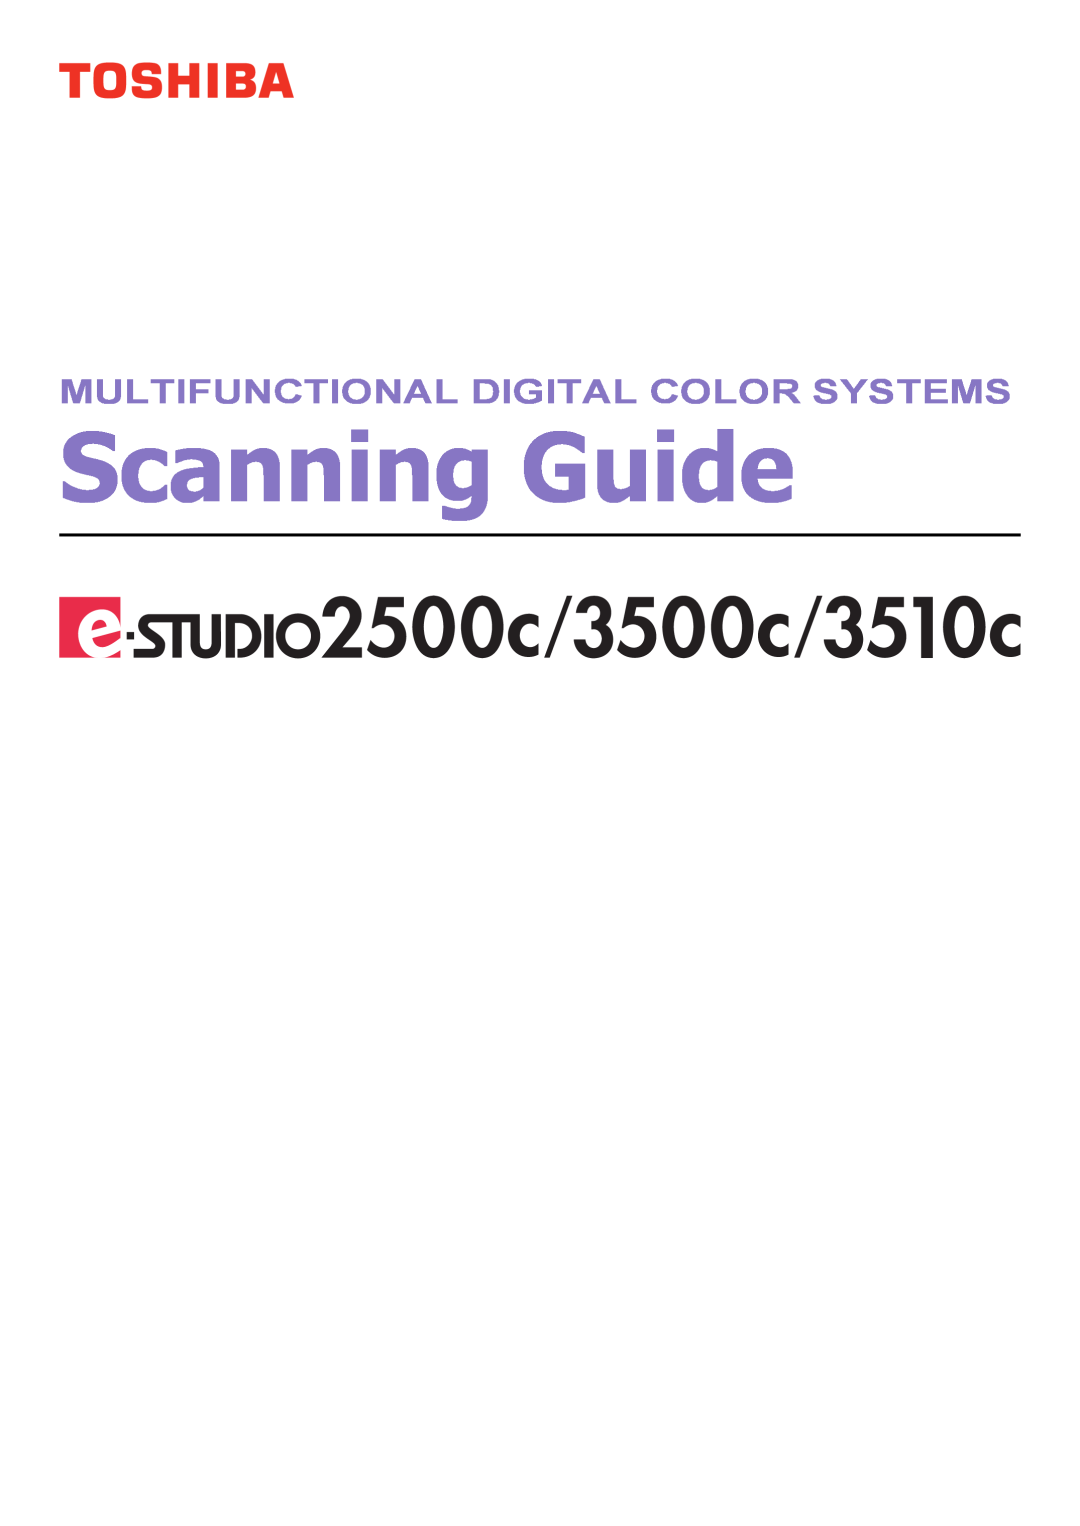 Toshiba 2500C, 3500C, 3510C manual Scanning Guide, Multifunctional Digital Color Systems 